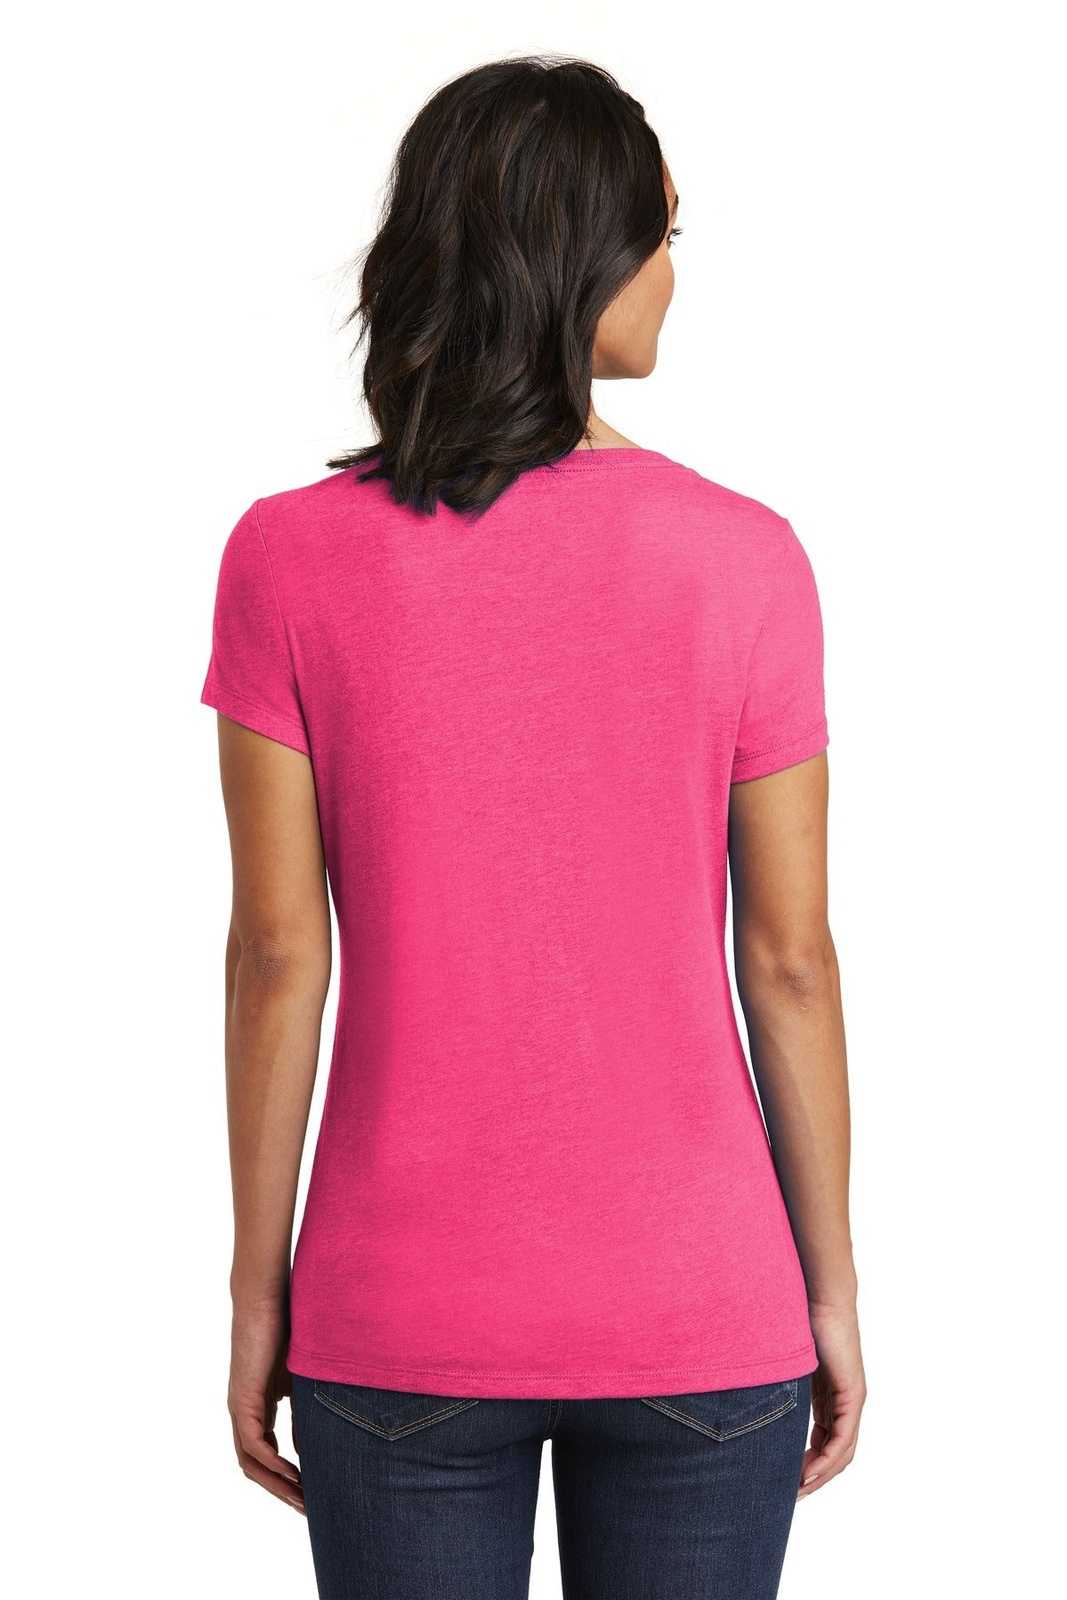 District DT6503 Women's Very Important Tee V-Neck - Fuchsia Frost - HIT a Double - 1